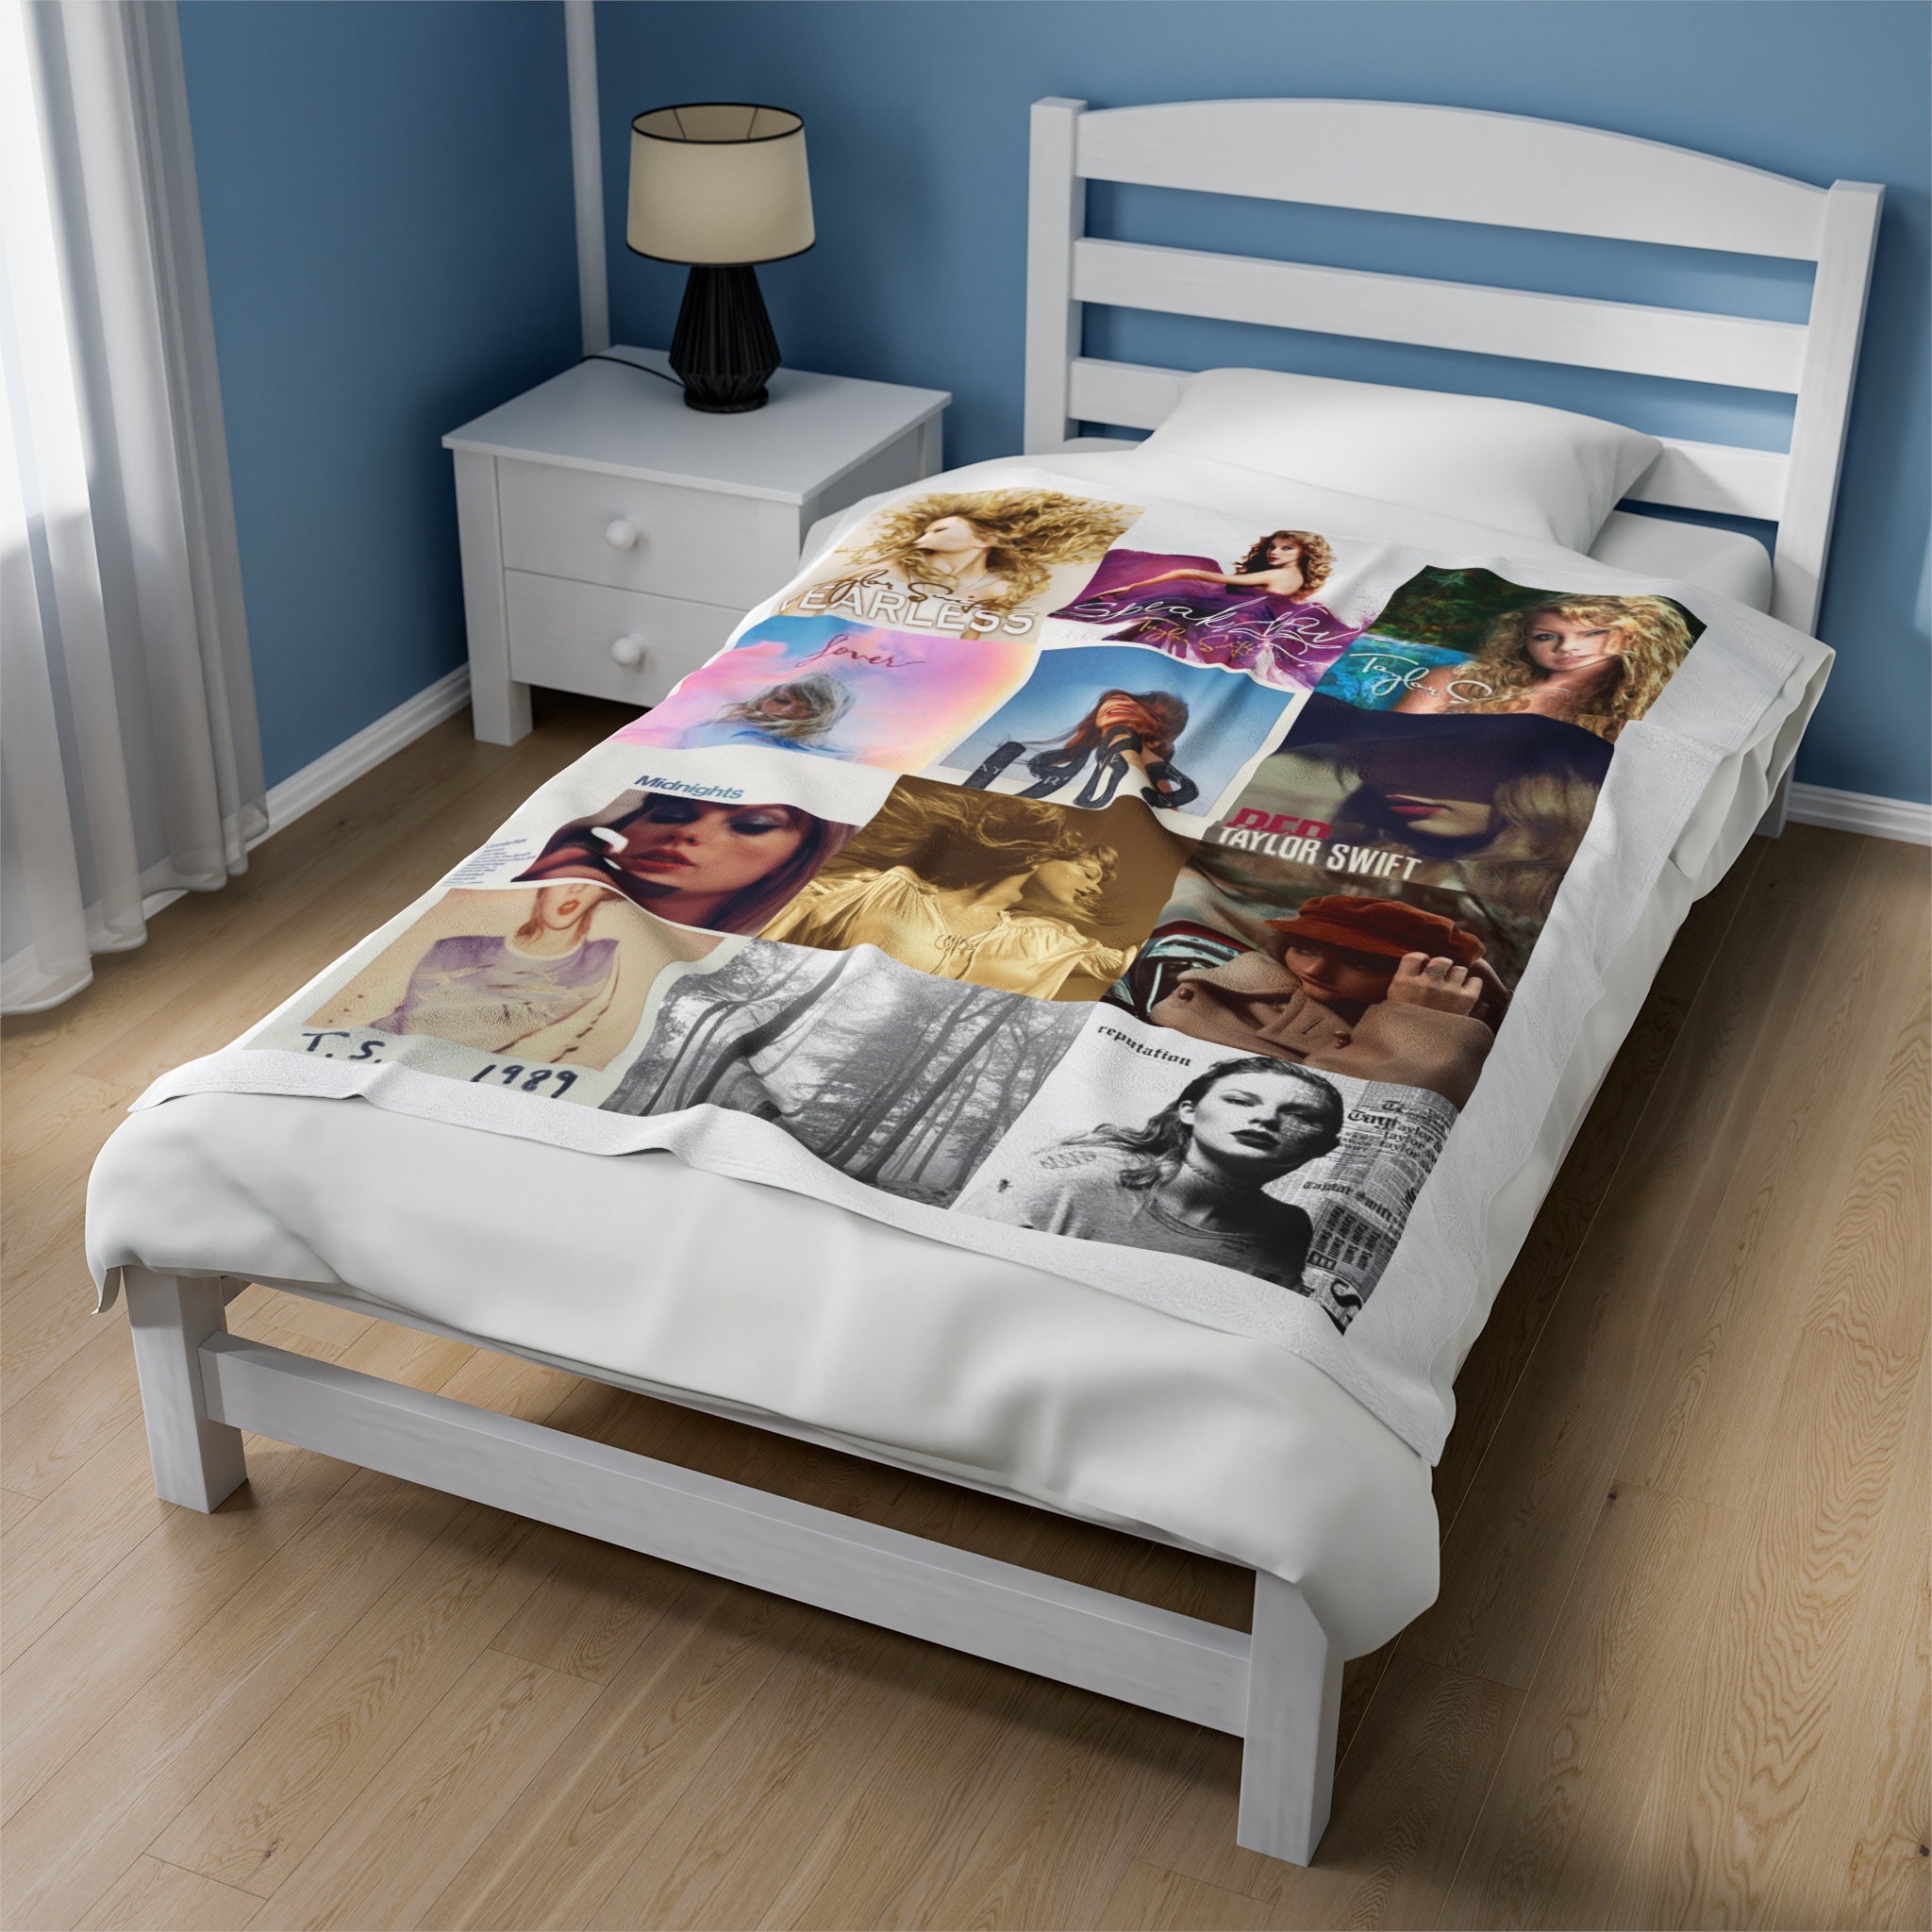 Taylor ERAS Tour Swift Fleece Blanket, TS taylor version Blanket, Gift for Her, Birthday Christmas Gift, Taylor merch Fans Gift